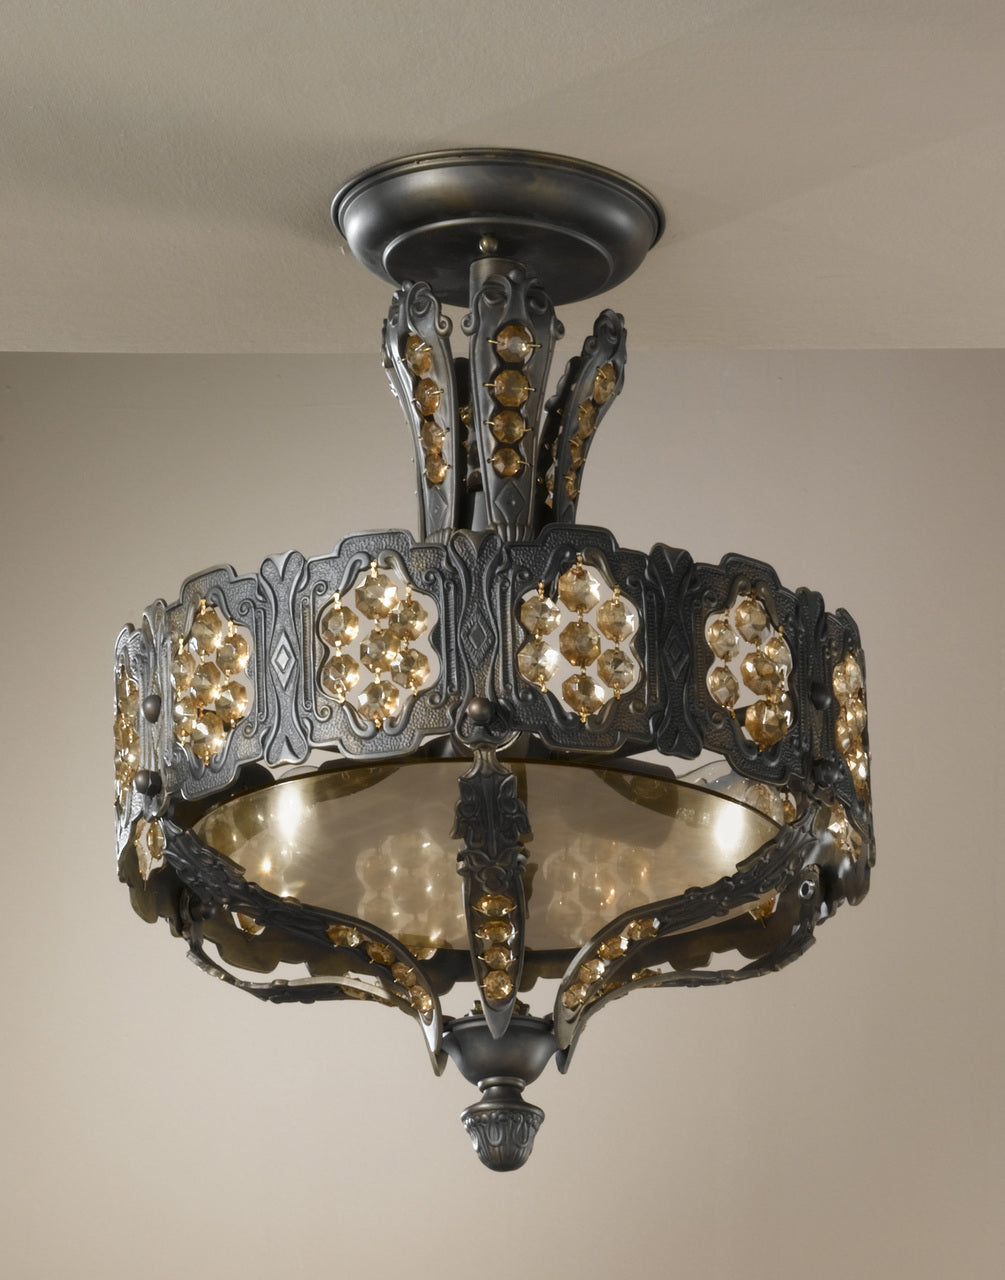 Classic Lighting 57330 AGB AI Castillio de Bronce Cast Brass Flushmount in Aged Bronze (Imported from Spain)